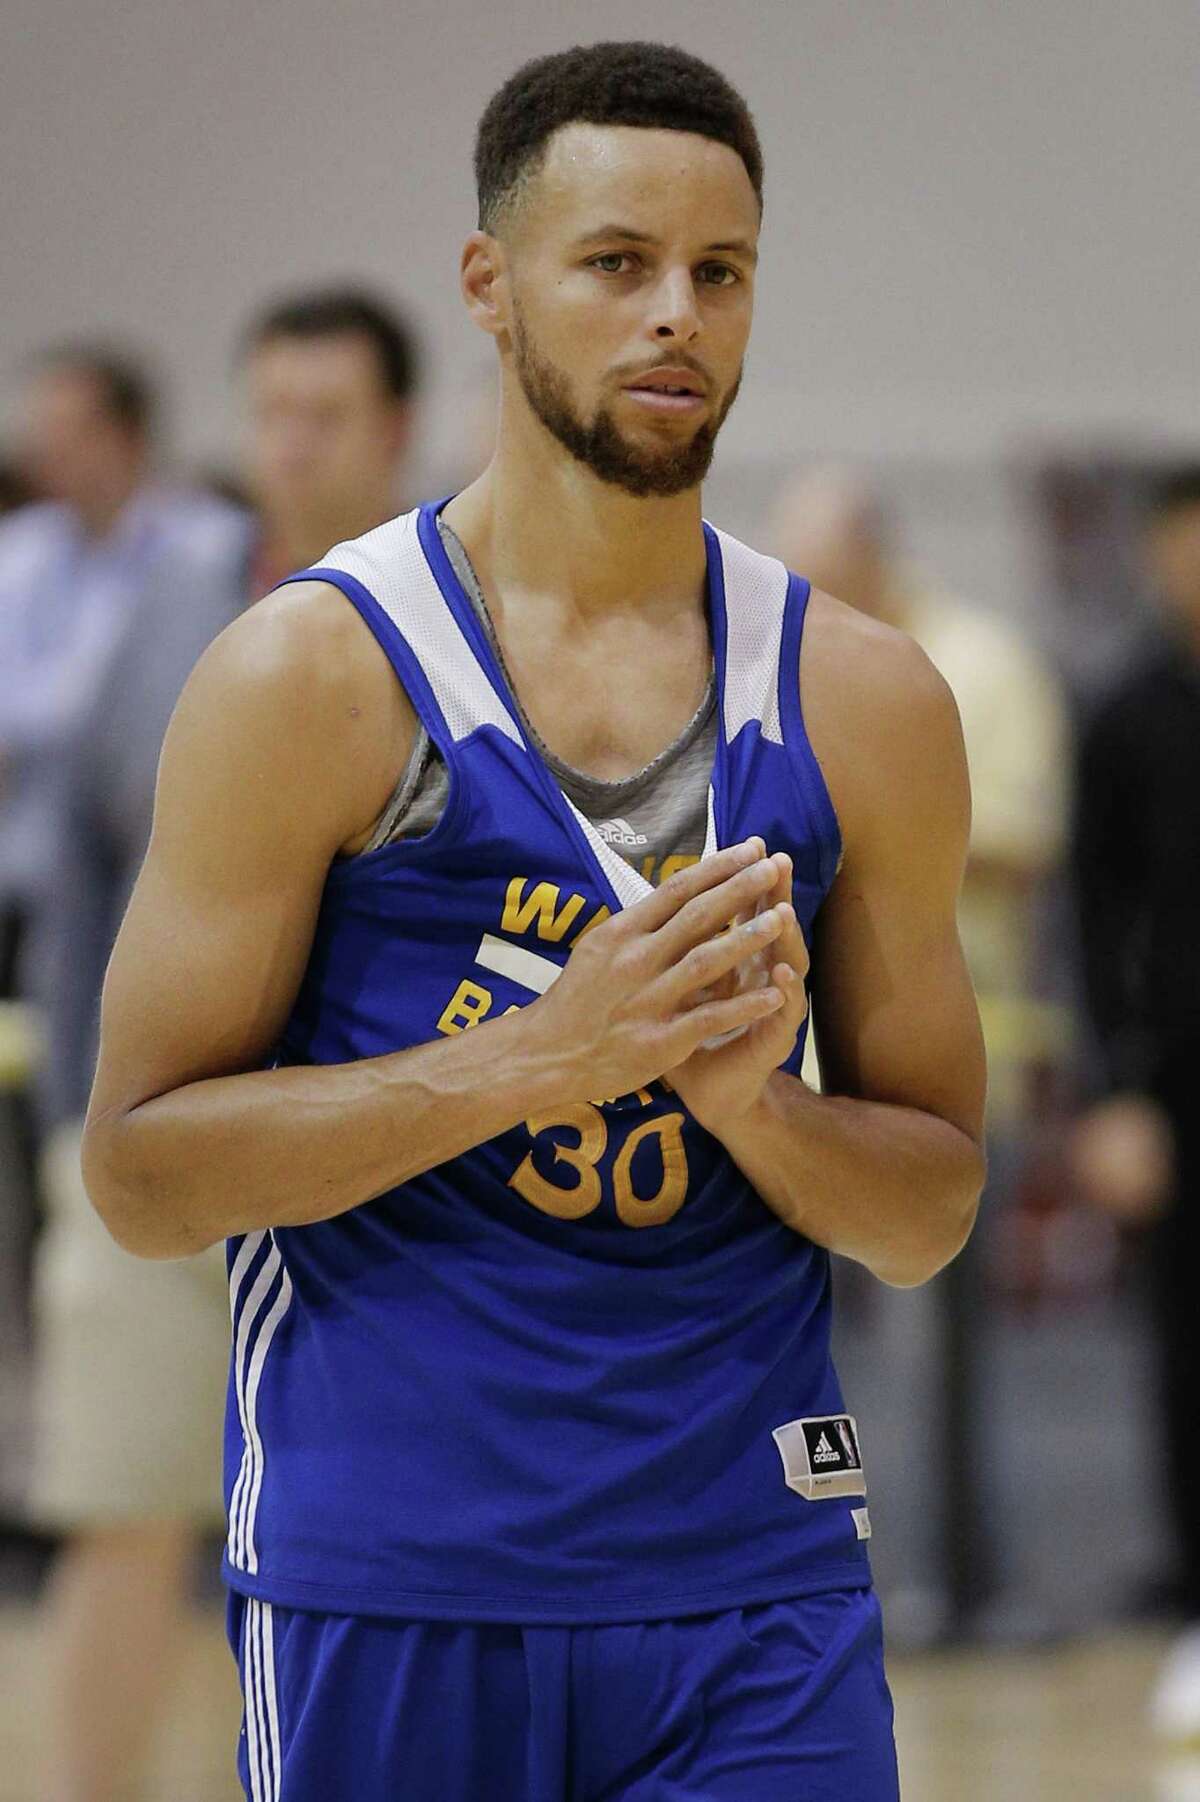 Warriors guard Stephen Curry at the Warriors practice facility on Saturday, June 3, 2017, in Oakland, Calif. In the NBA Finals, the Warriors lead the series 1-0 against the Cleveland Cavaliers. They play Game 2 on Sunday.